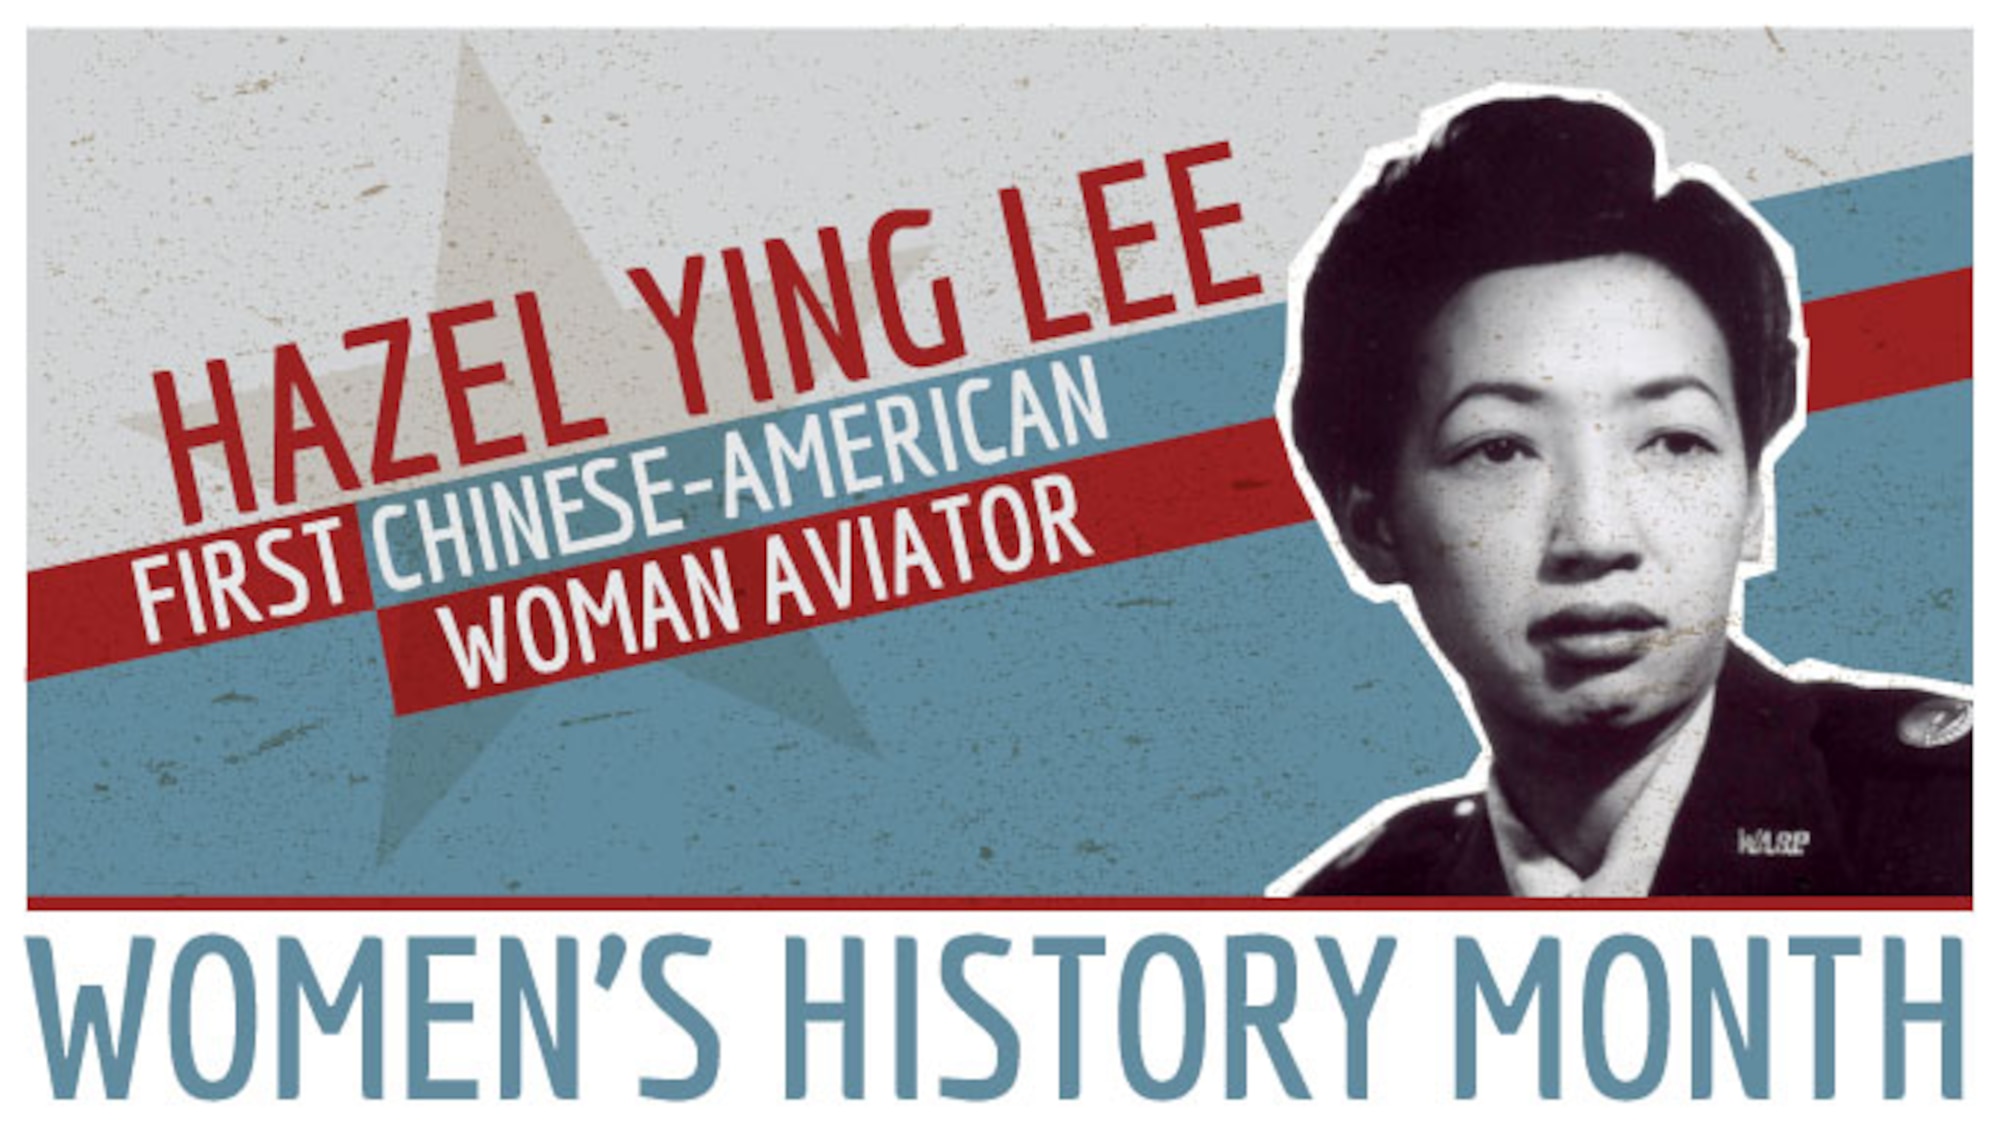 Hazel Ying Lee was the first Chinese-American woman aviator.